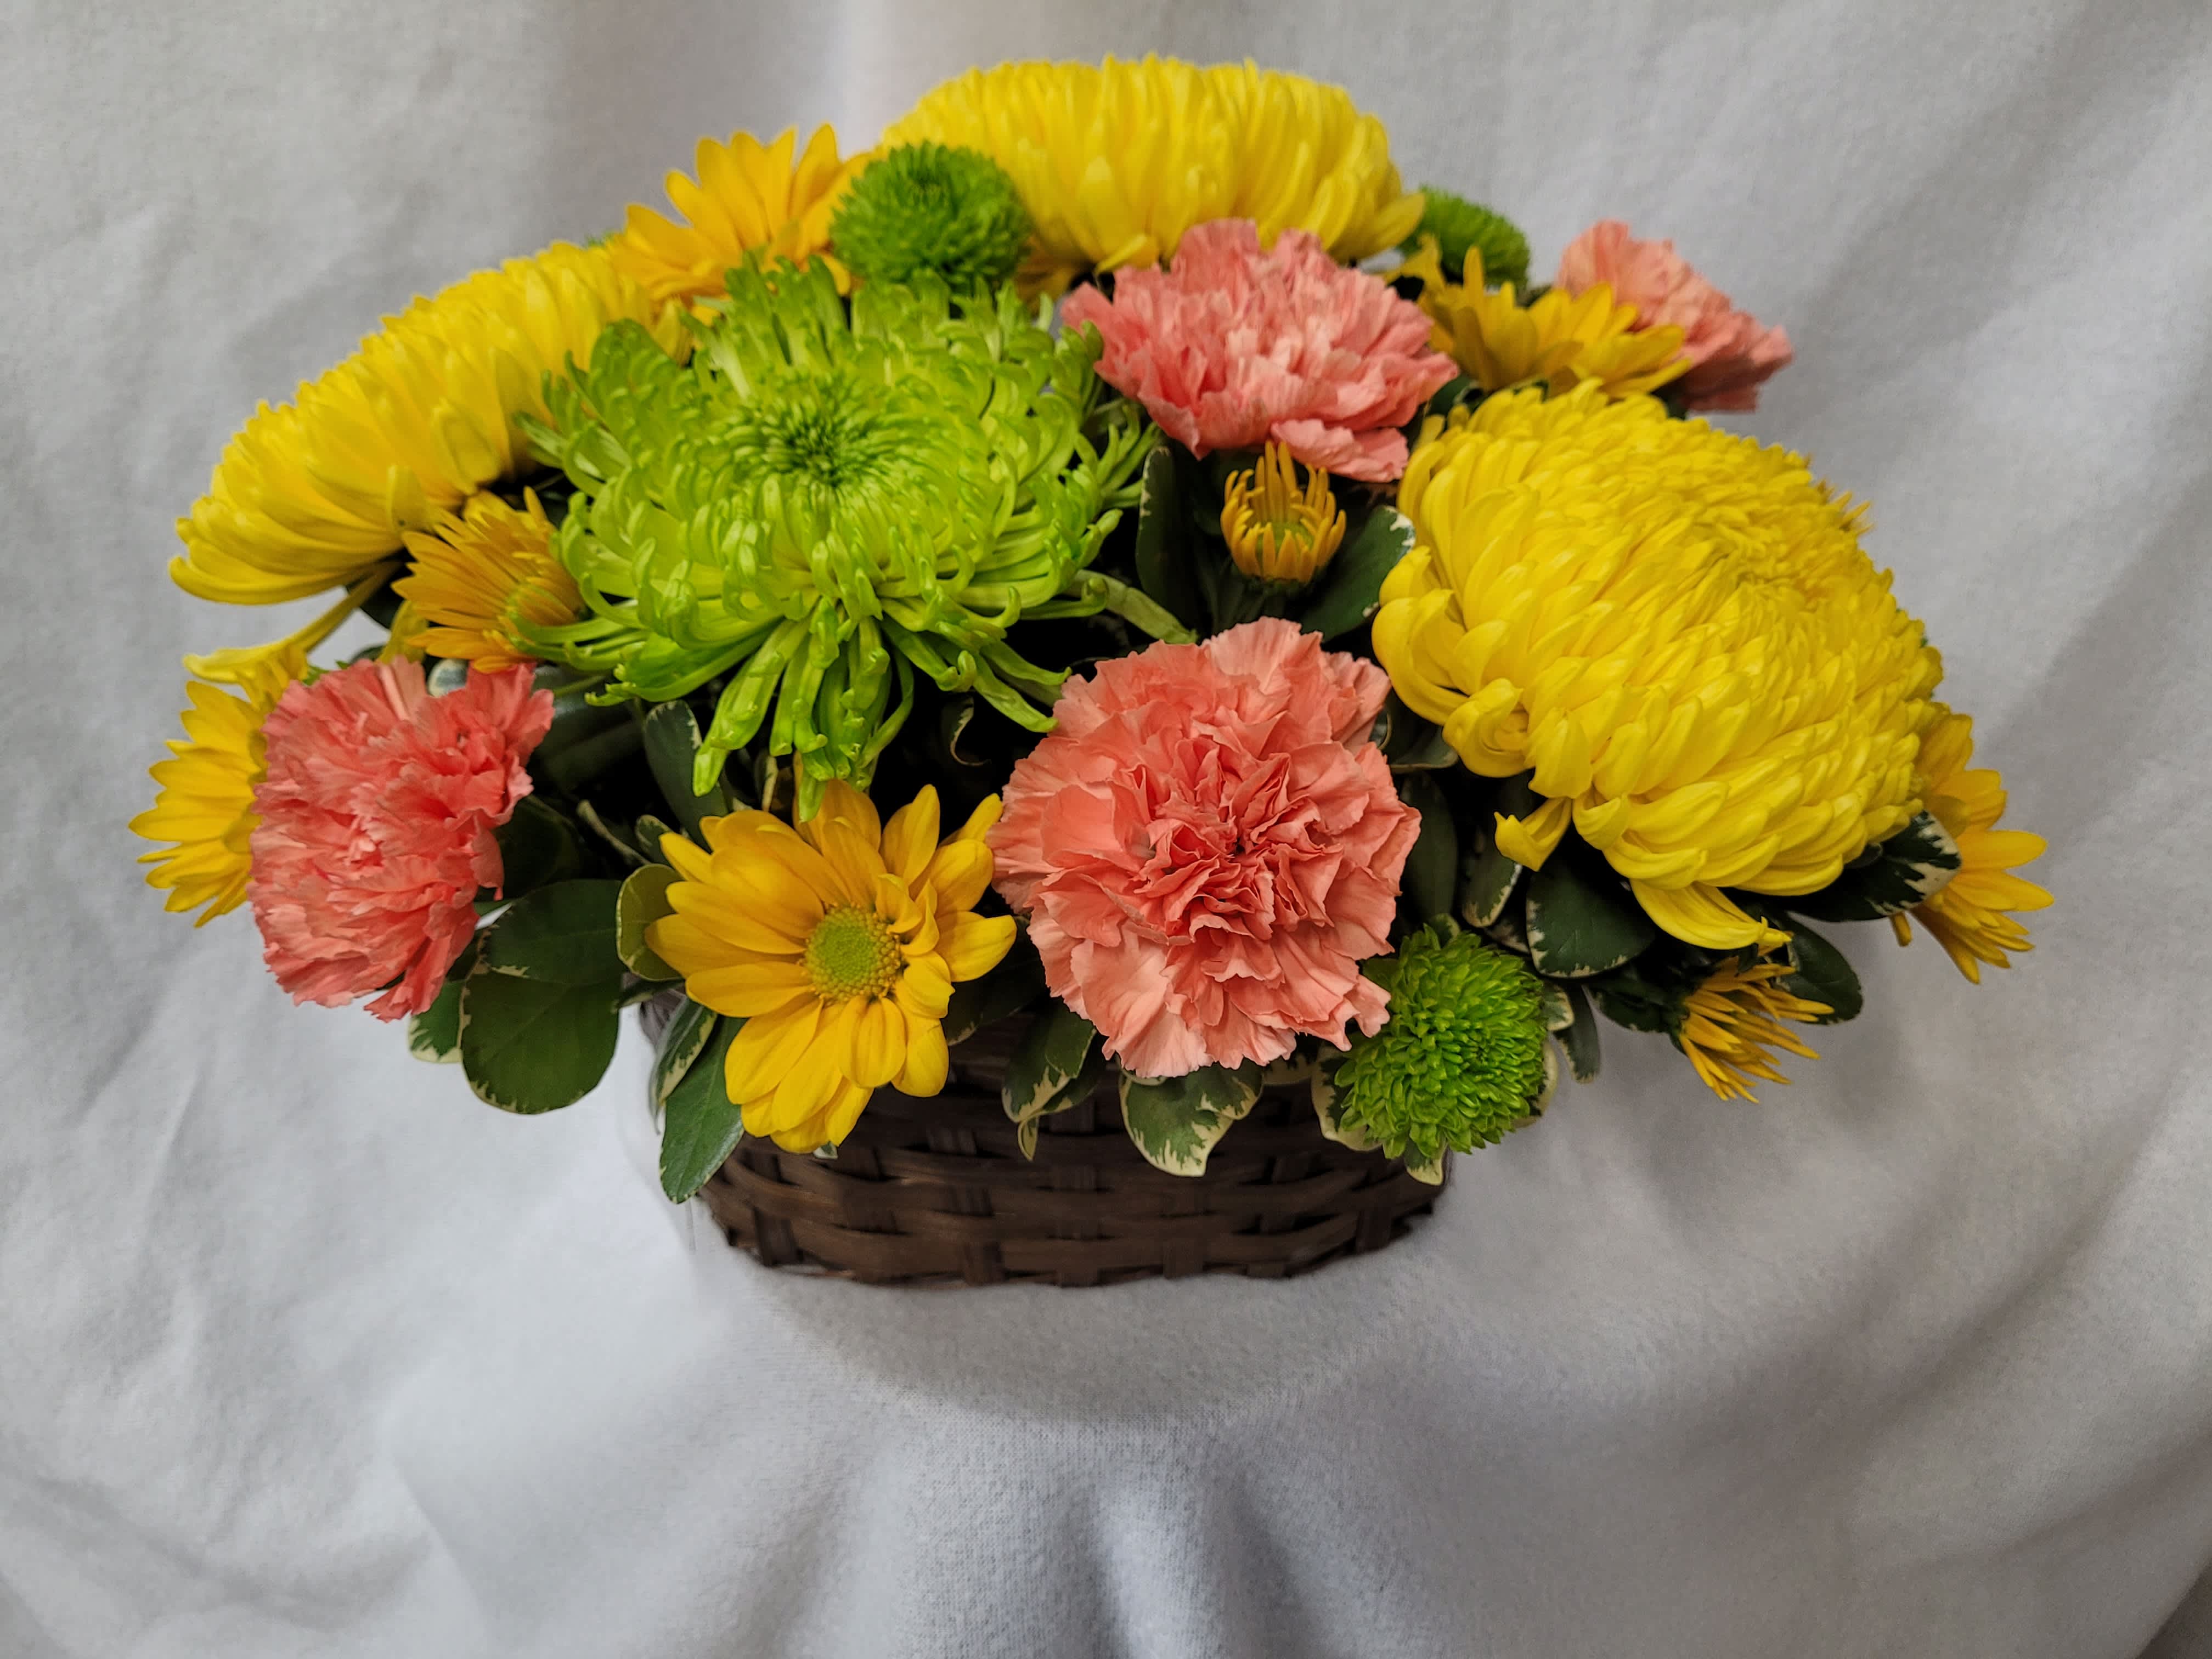 A Basket of Sunshine - This oval basket contains yellow cremones, green spider mum, yellow daisies, green daisies and orange carnations.